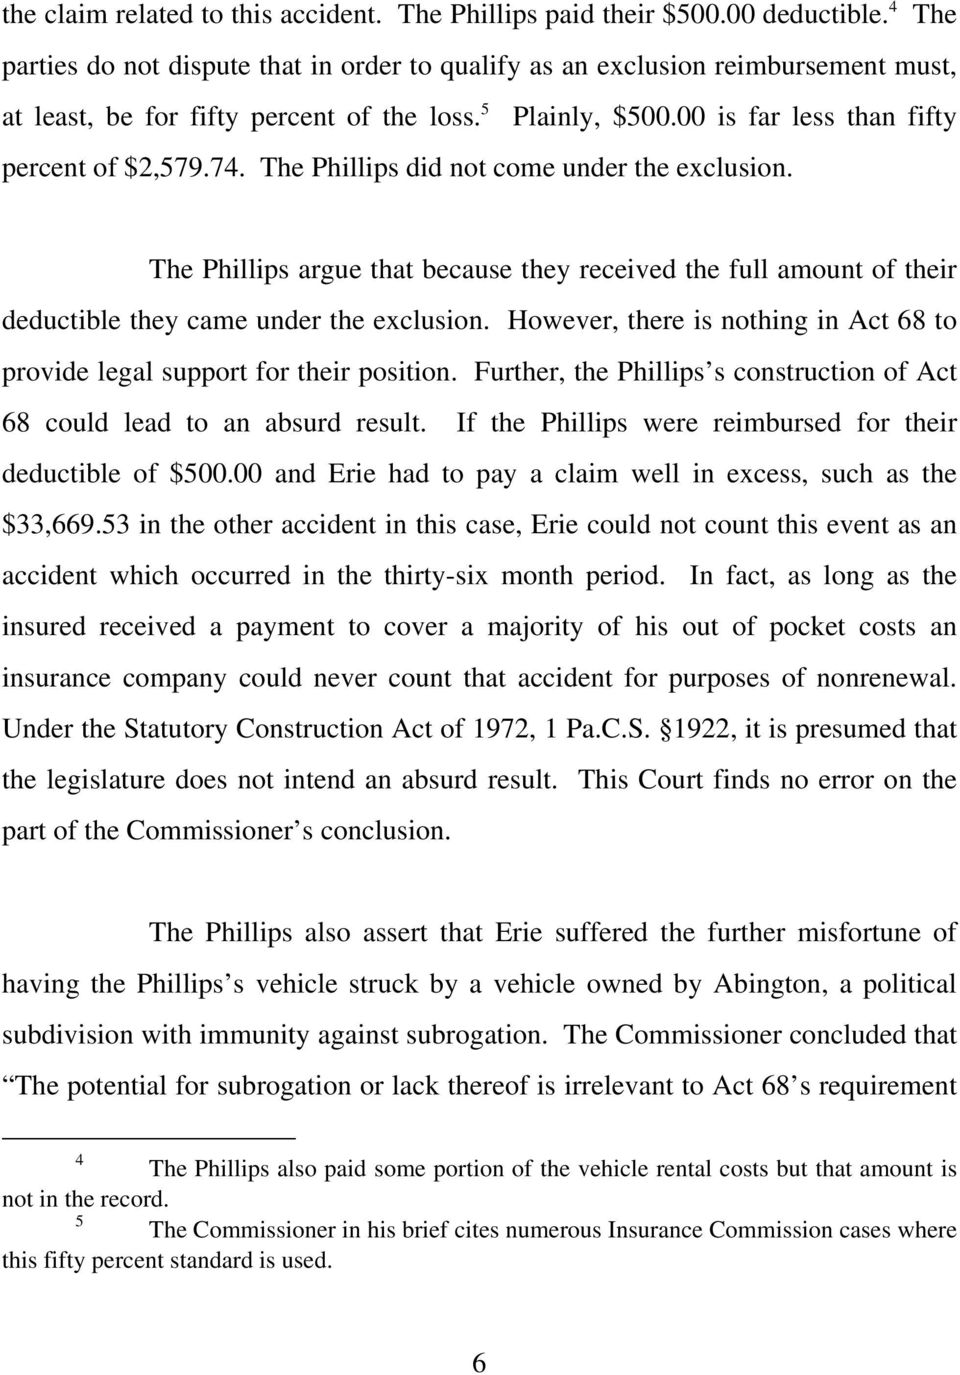 The Phillips did not come under the exclusion. The Phillips argue that because they received the full amount of their deductible they came under the exclusion.